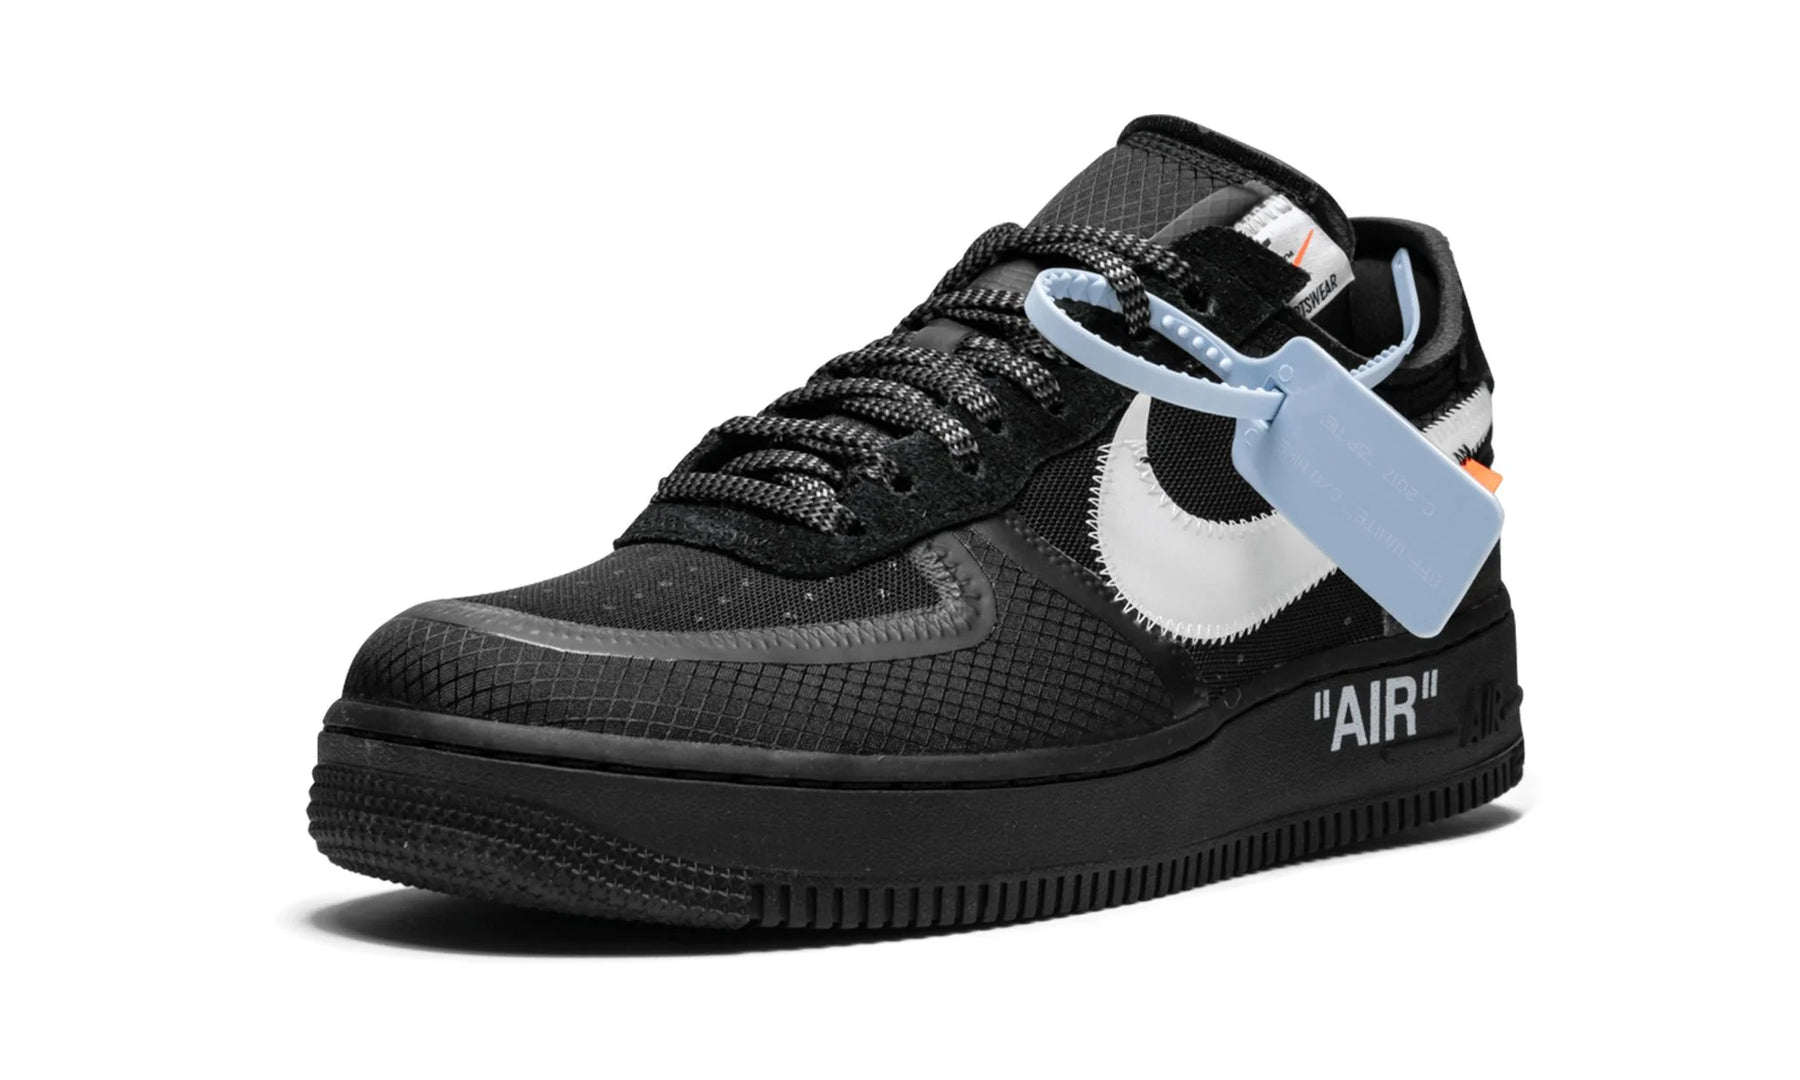 Nike Air Force 1 Low "Off-White-Black"